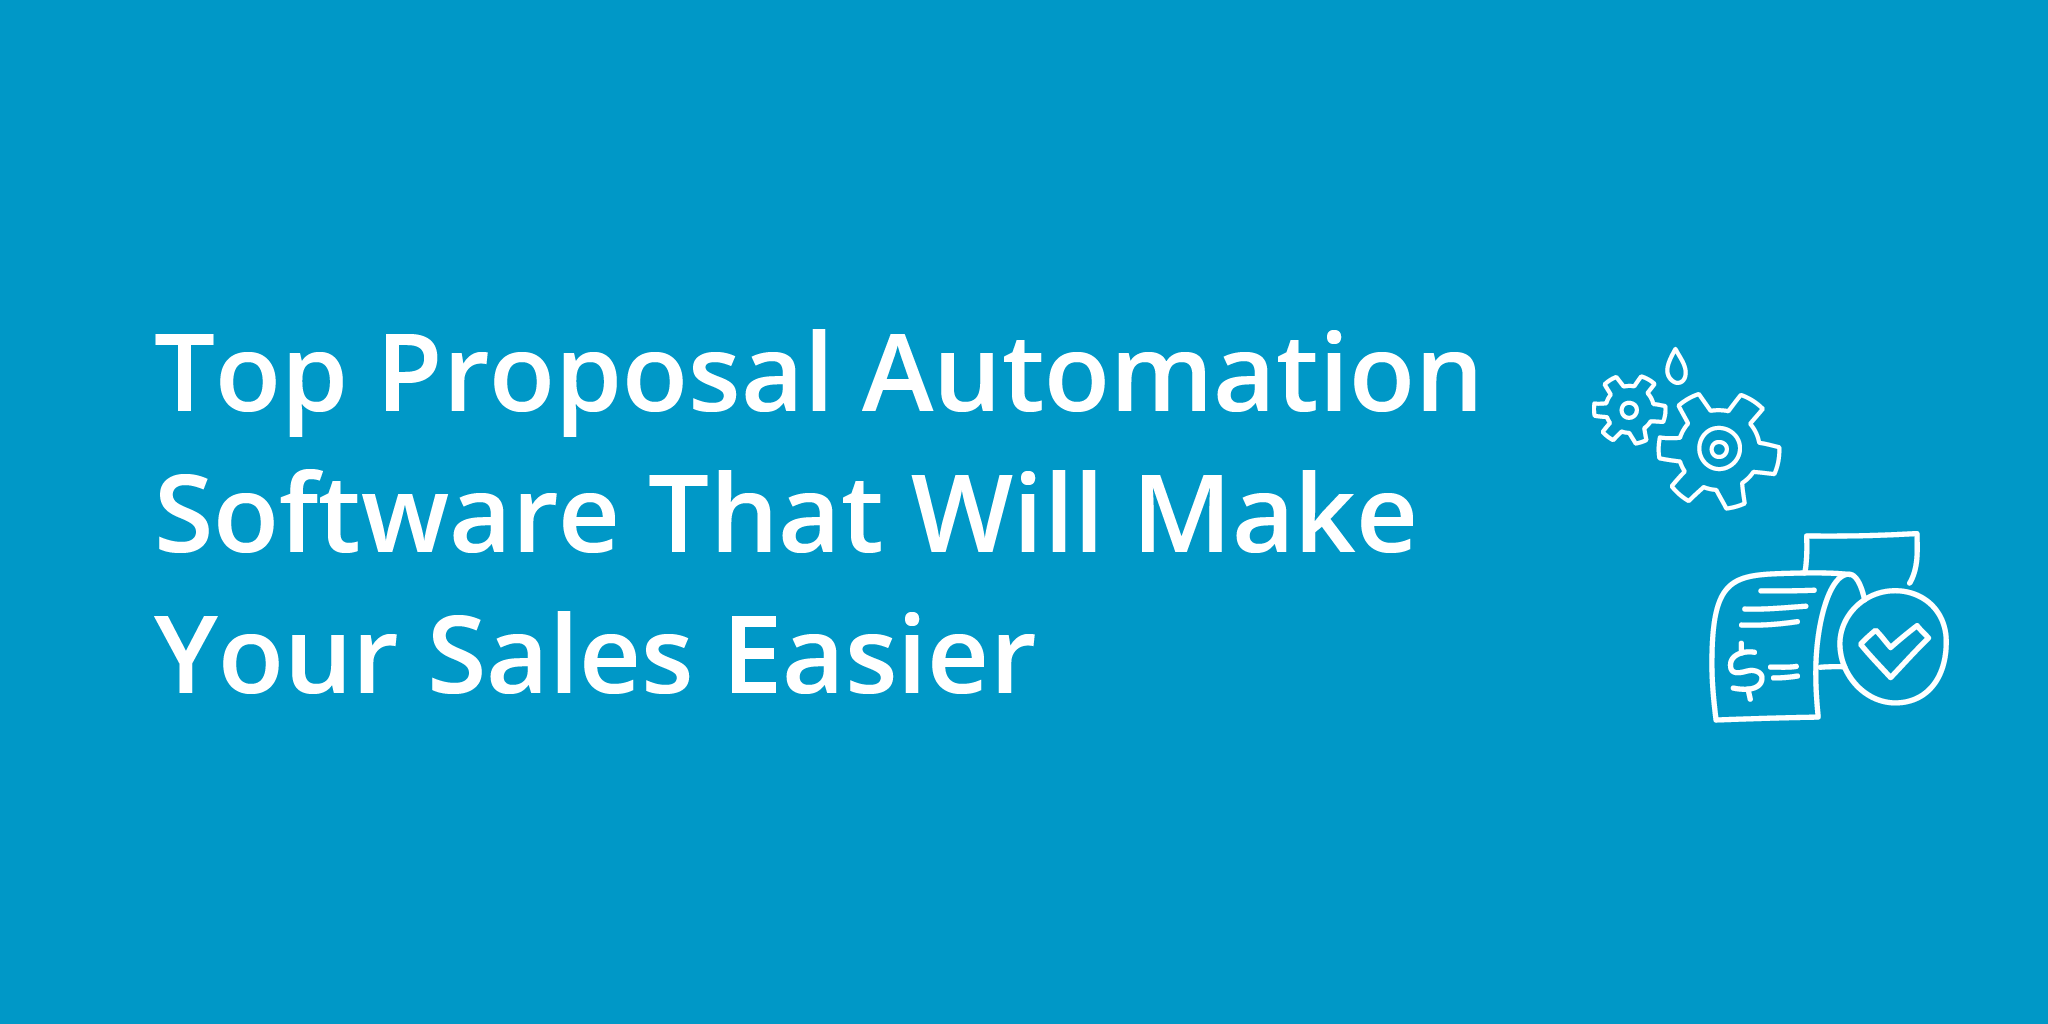 Top Proposal Automation Software That Will Make Your Sales Easier | Telephones for business